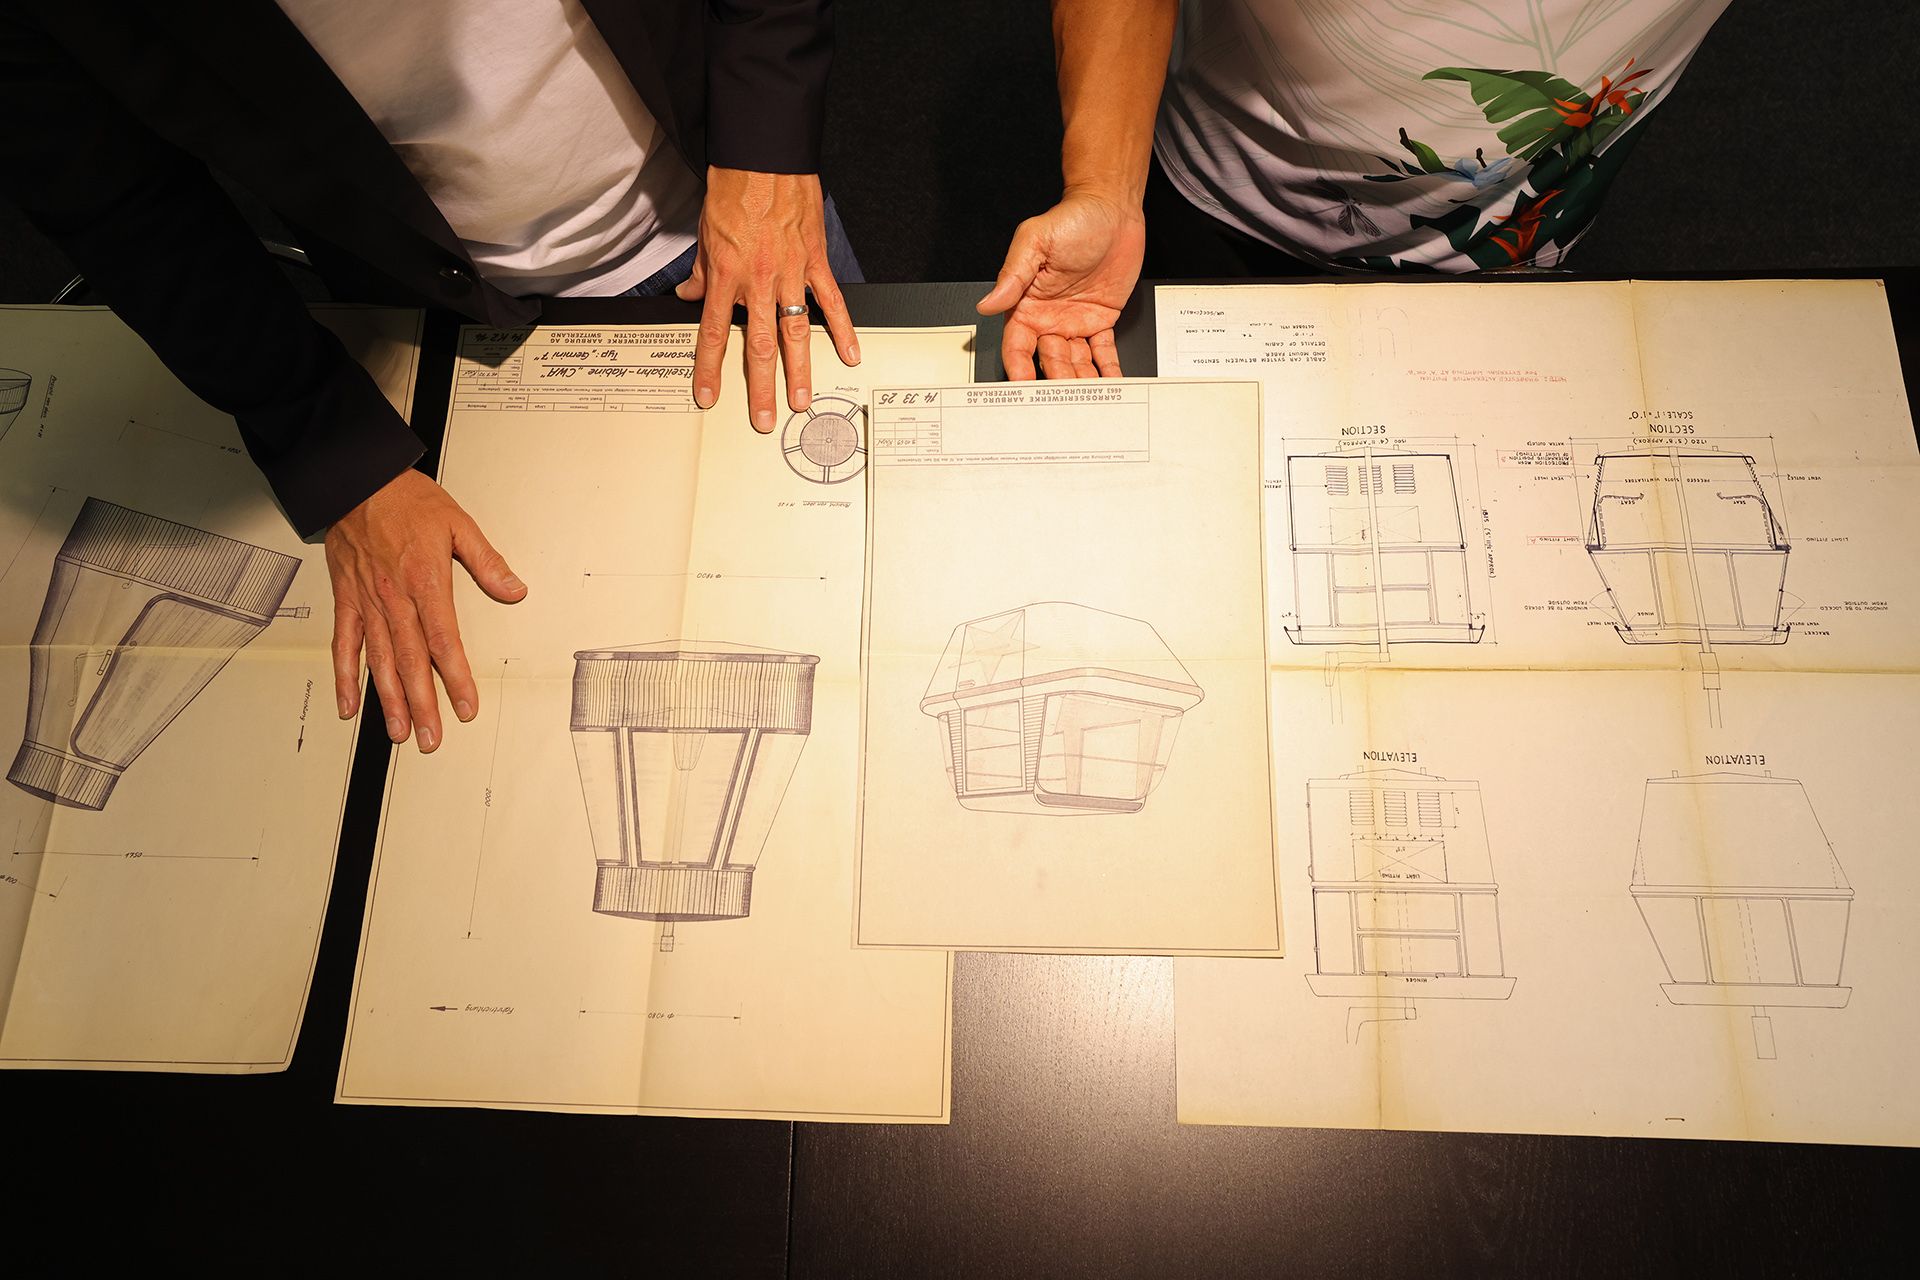 (From left) Blueprints dated 1970, 1969 and 1971, detailing a few design specifications of Singapore's first cable car system.